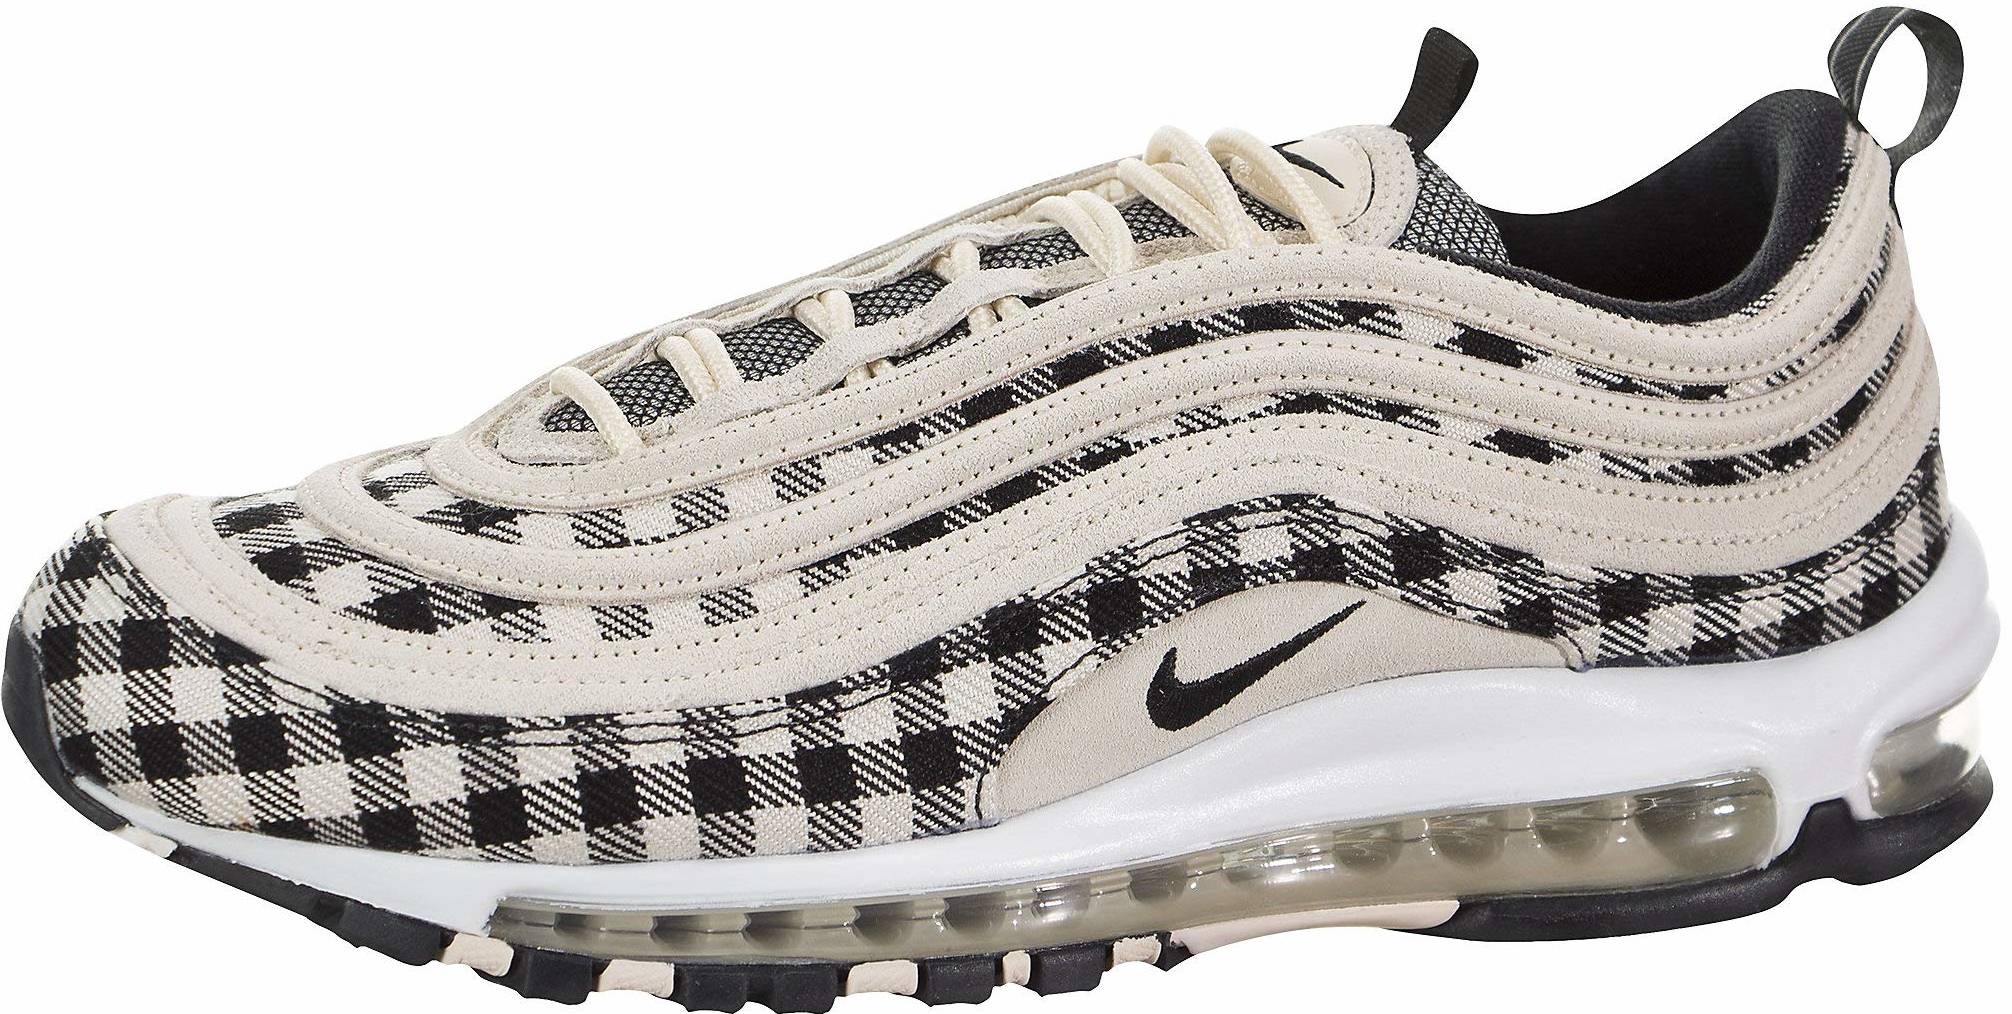 Save 34% on Nike Air Max 97 Sneakers 